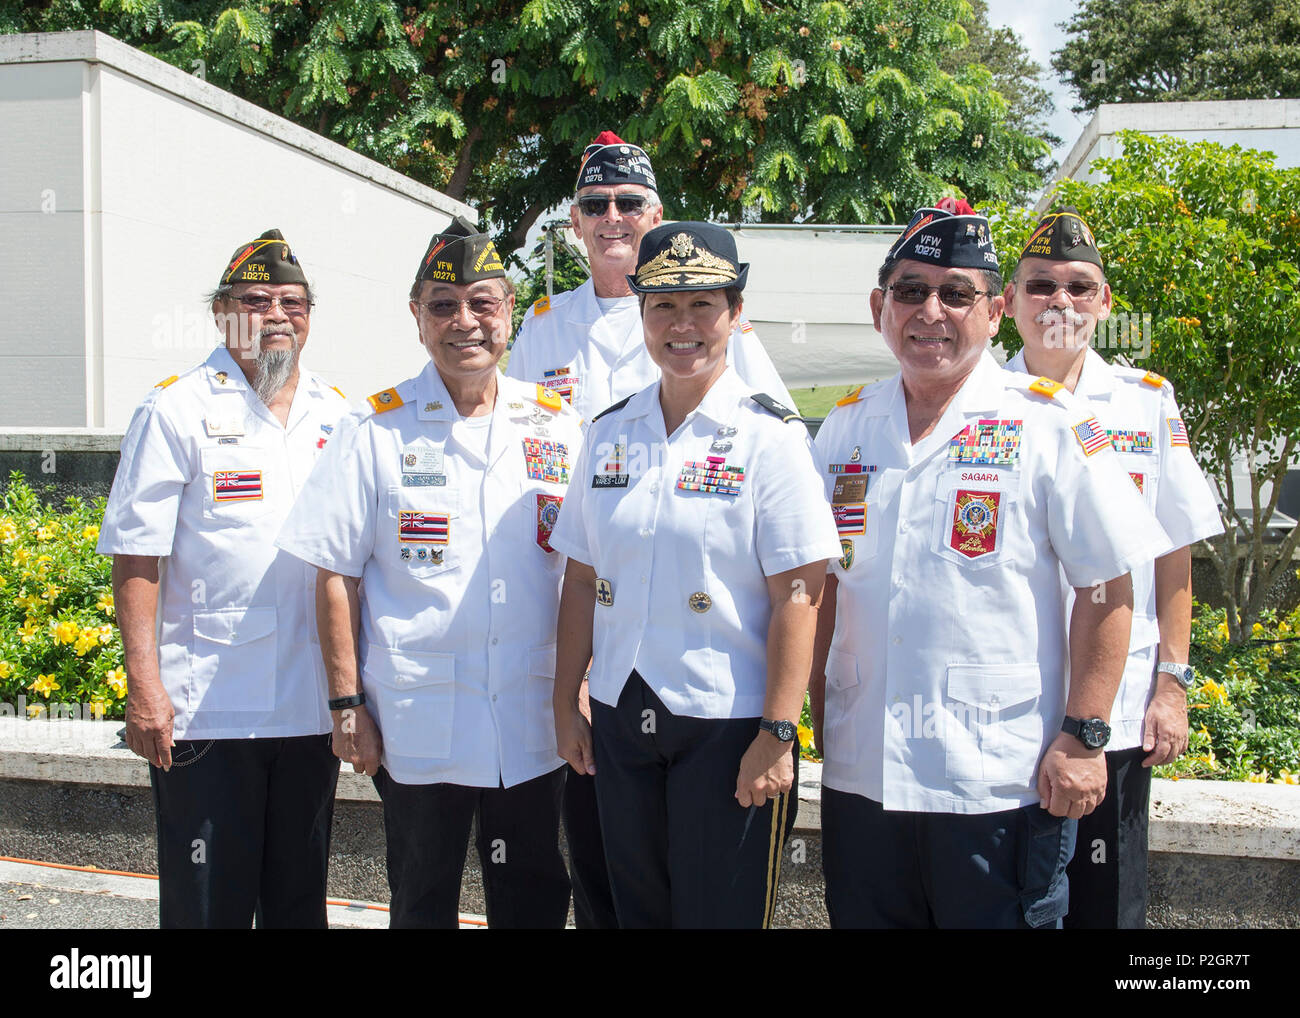 U.S. Navy Brig. Gen. Suzanne P. Vares-Lum, Mobilization Assistant, Strategic Planning and Policy of U.S. Pacific Command, pose for a photo with members of Veterans of Foreign Wars at the 11th Annual Joint Memorial Service at the National Memorial Cemetery of the Pacific in Honolulu, Hawaii, Sept. 25, 2016. The service is to honor Japanese American soldiers who served and sacrificed their lives during WWII. (U.S. Navy photo by Mass Communication Specialist 1st Class Jay M. Chu) Stock Photo